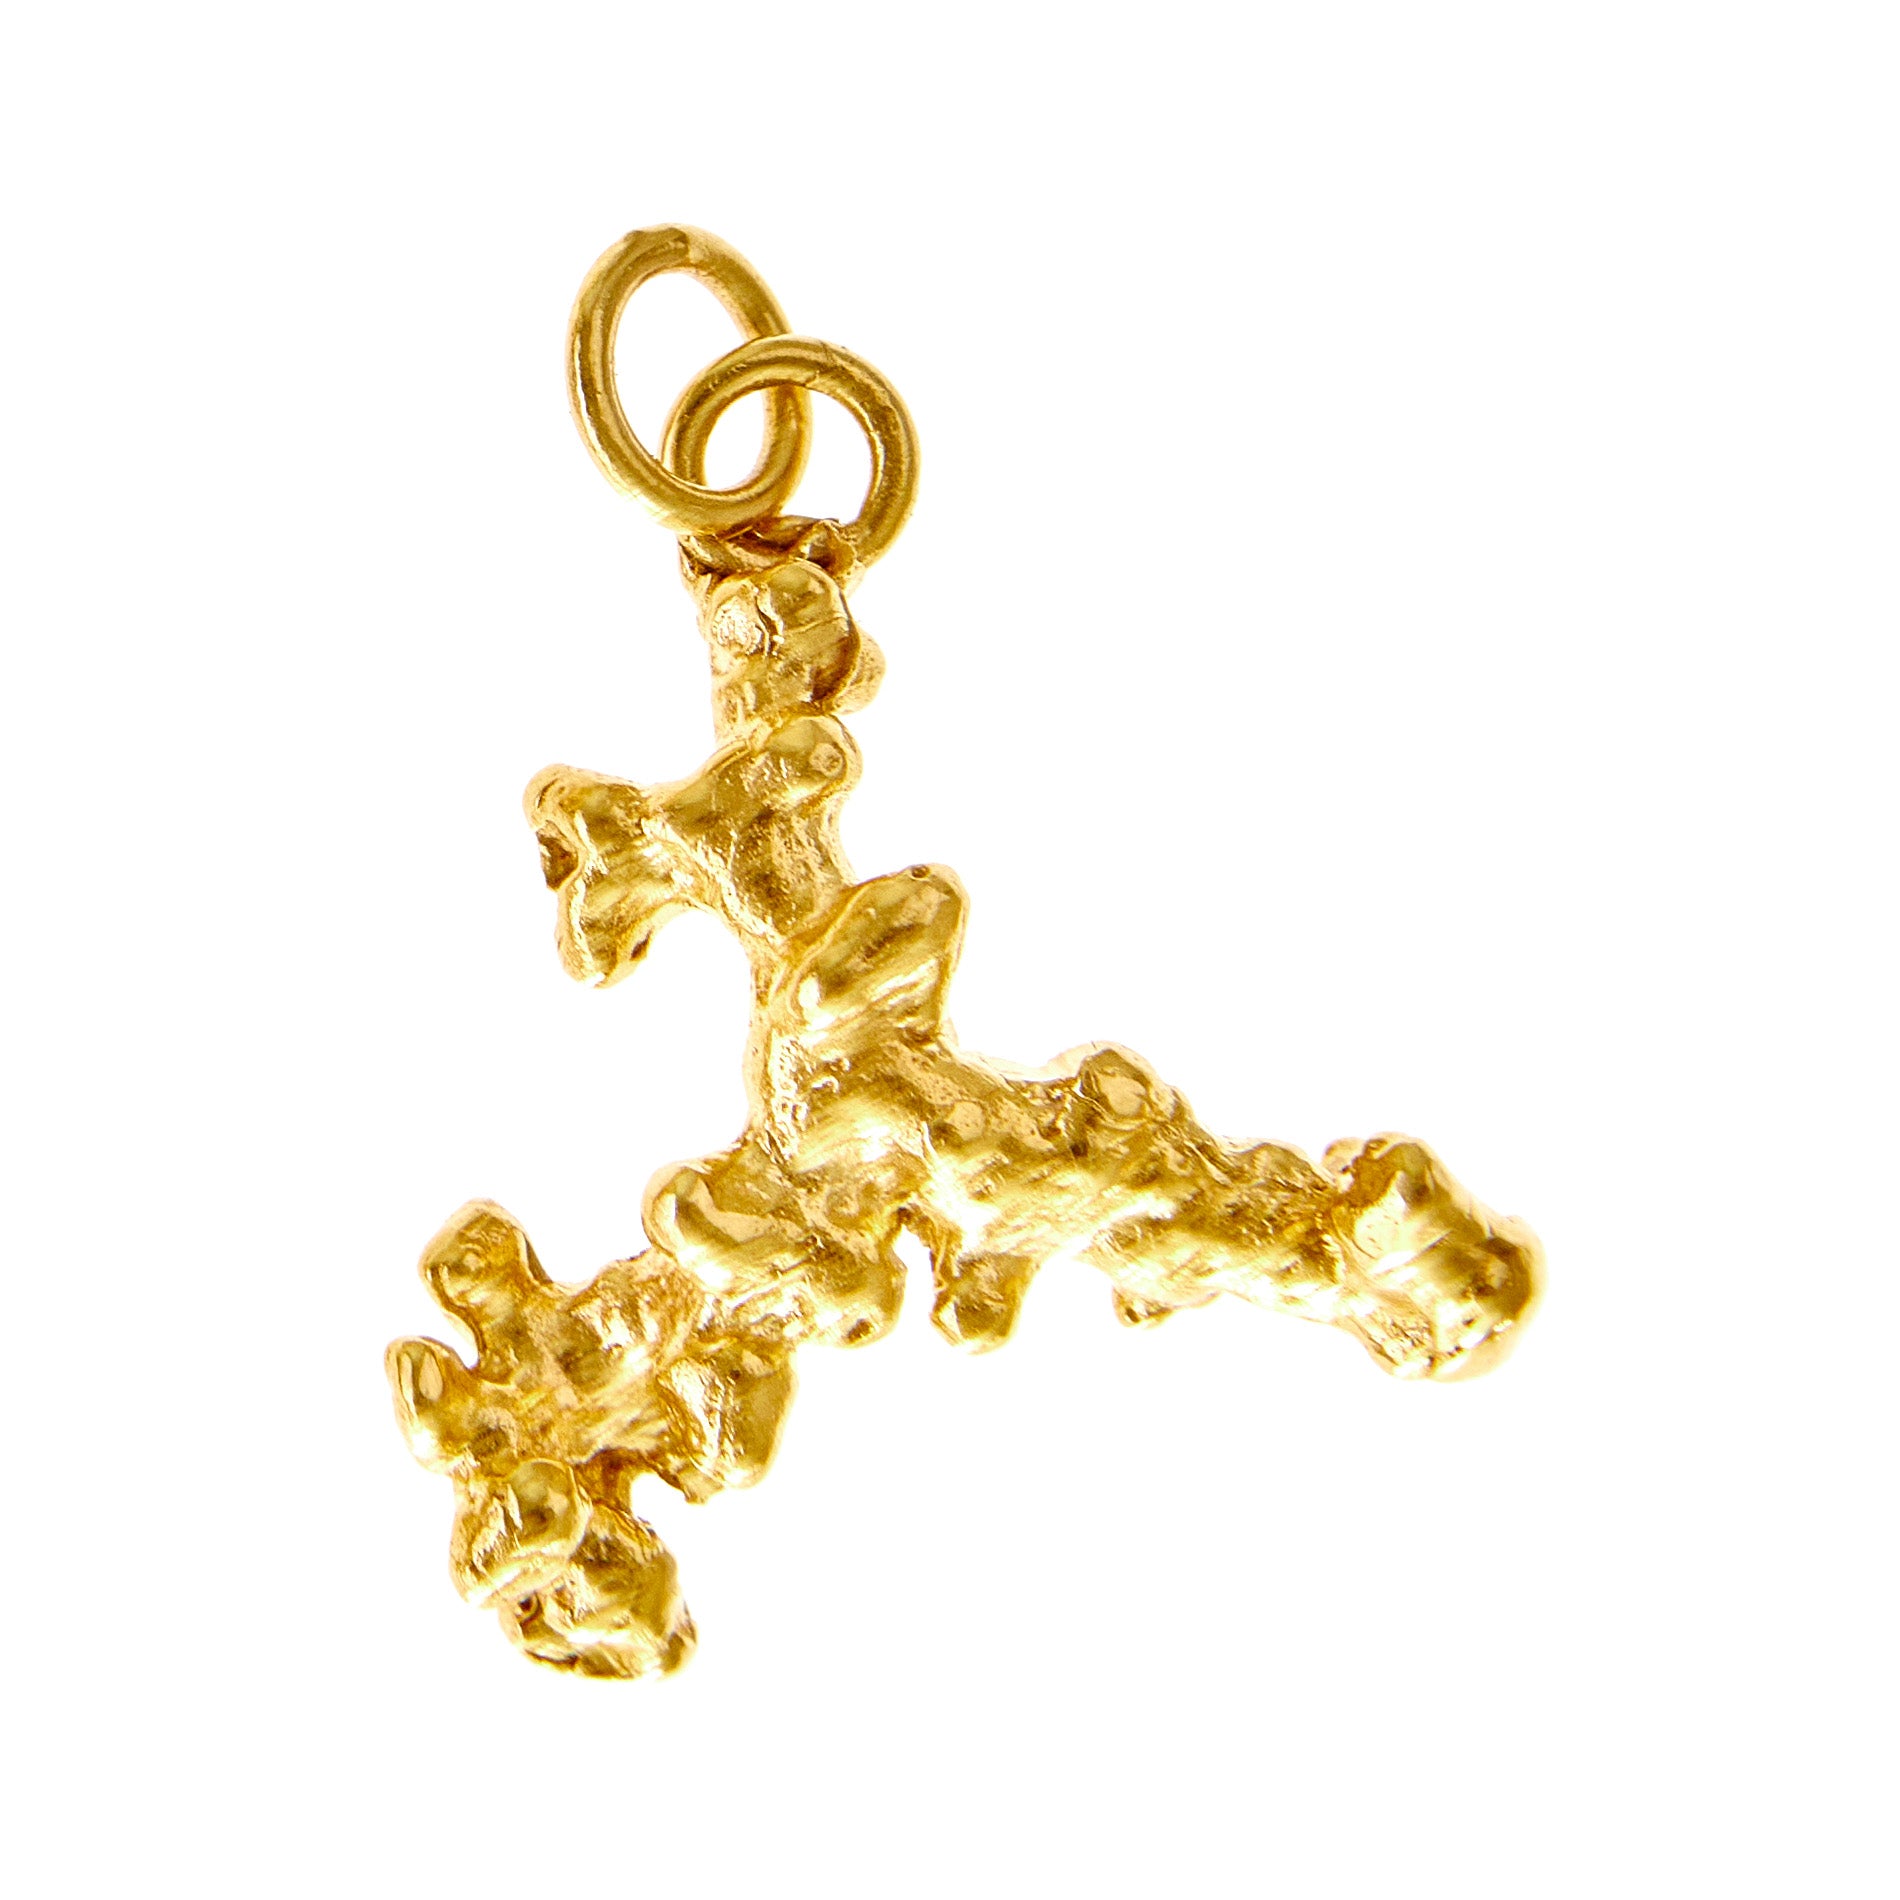 Corallia Phos Charm - Gold Vermeil Recycled Silver